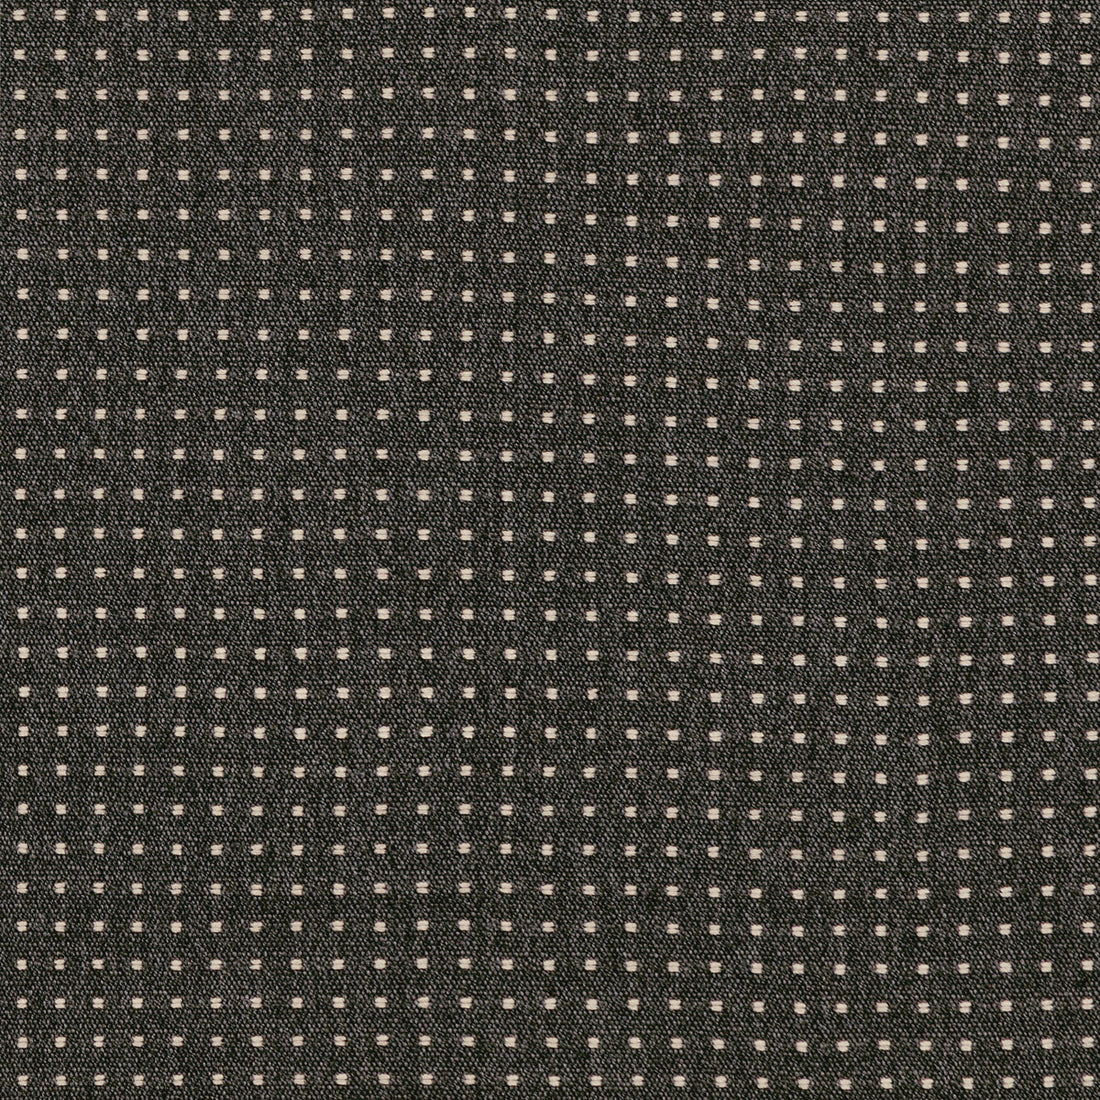 Tellus fabric in obsidian color - pattern GWF-3764.21.0 - by Lee Jofa Modern in the Kelly Wearstler VI collection